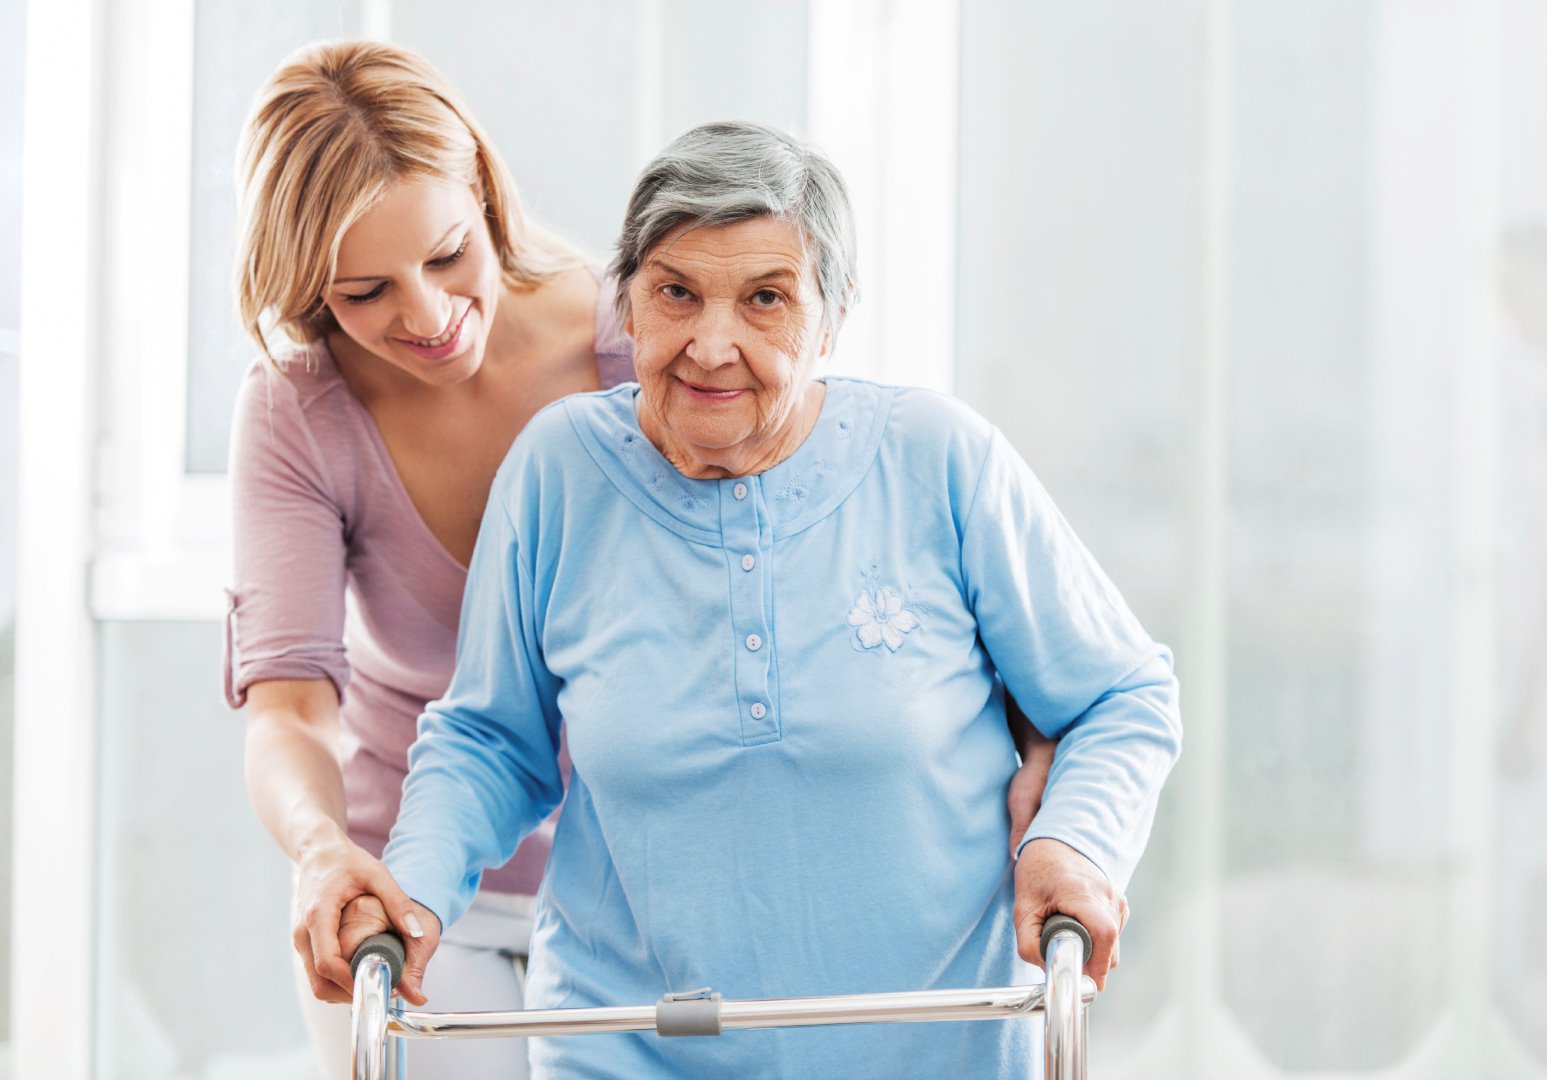 Elderly lady being helped with zimmer frame